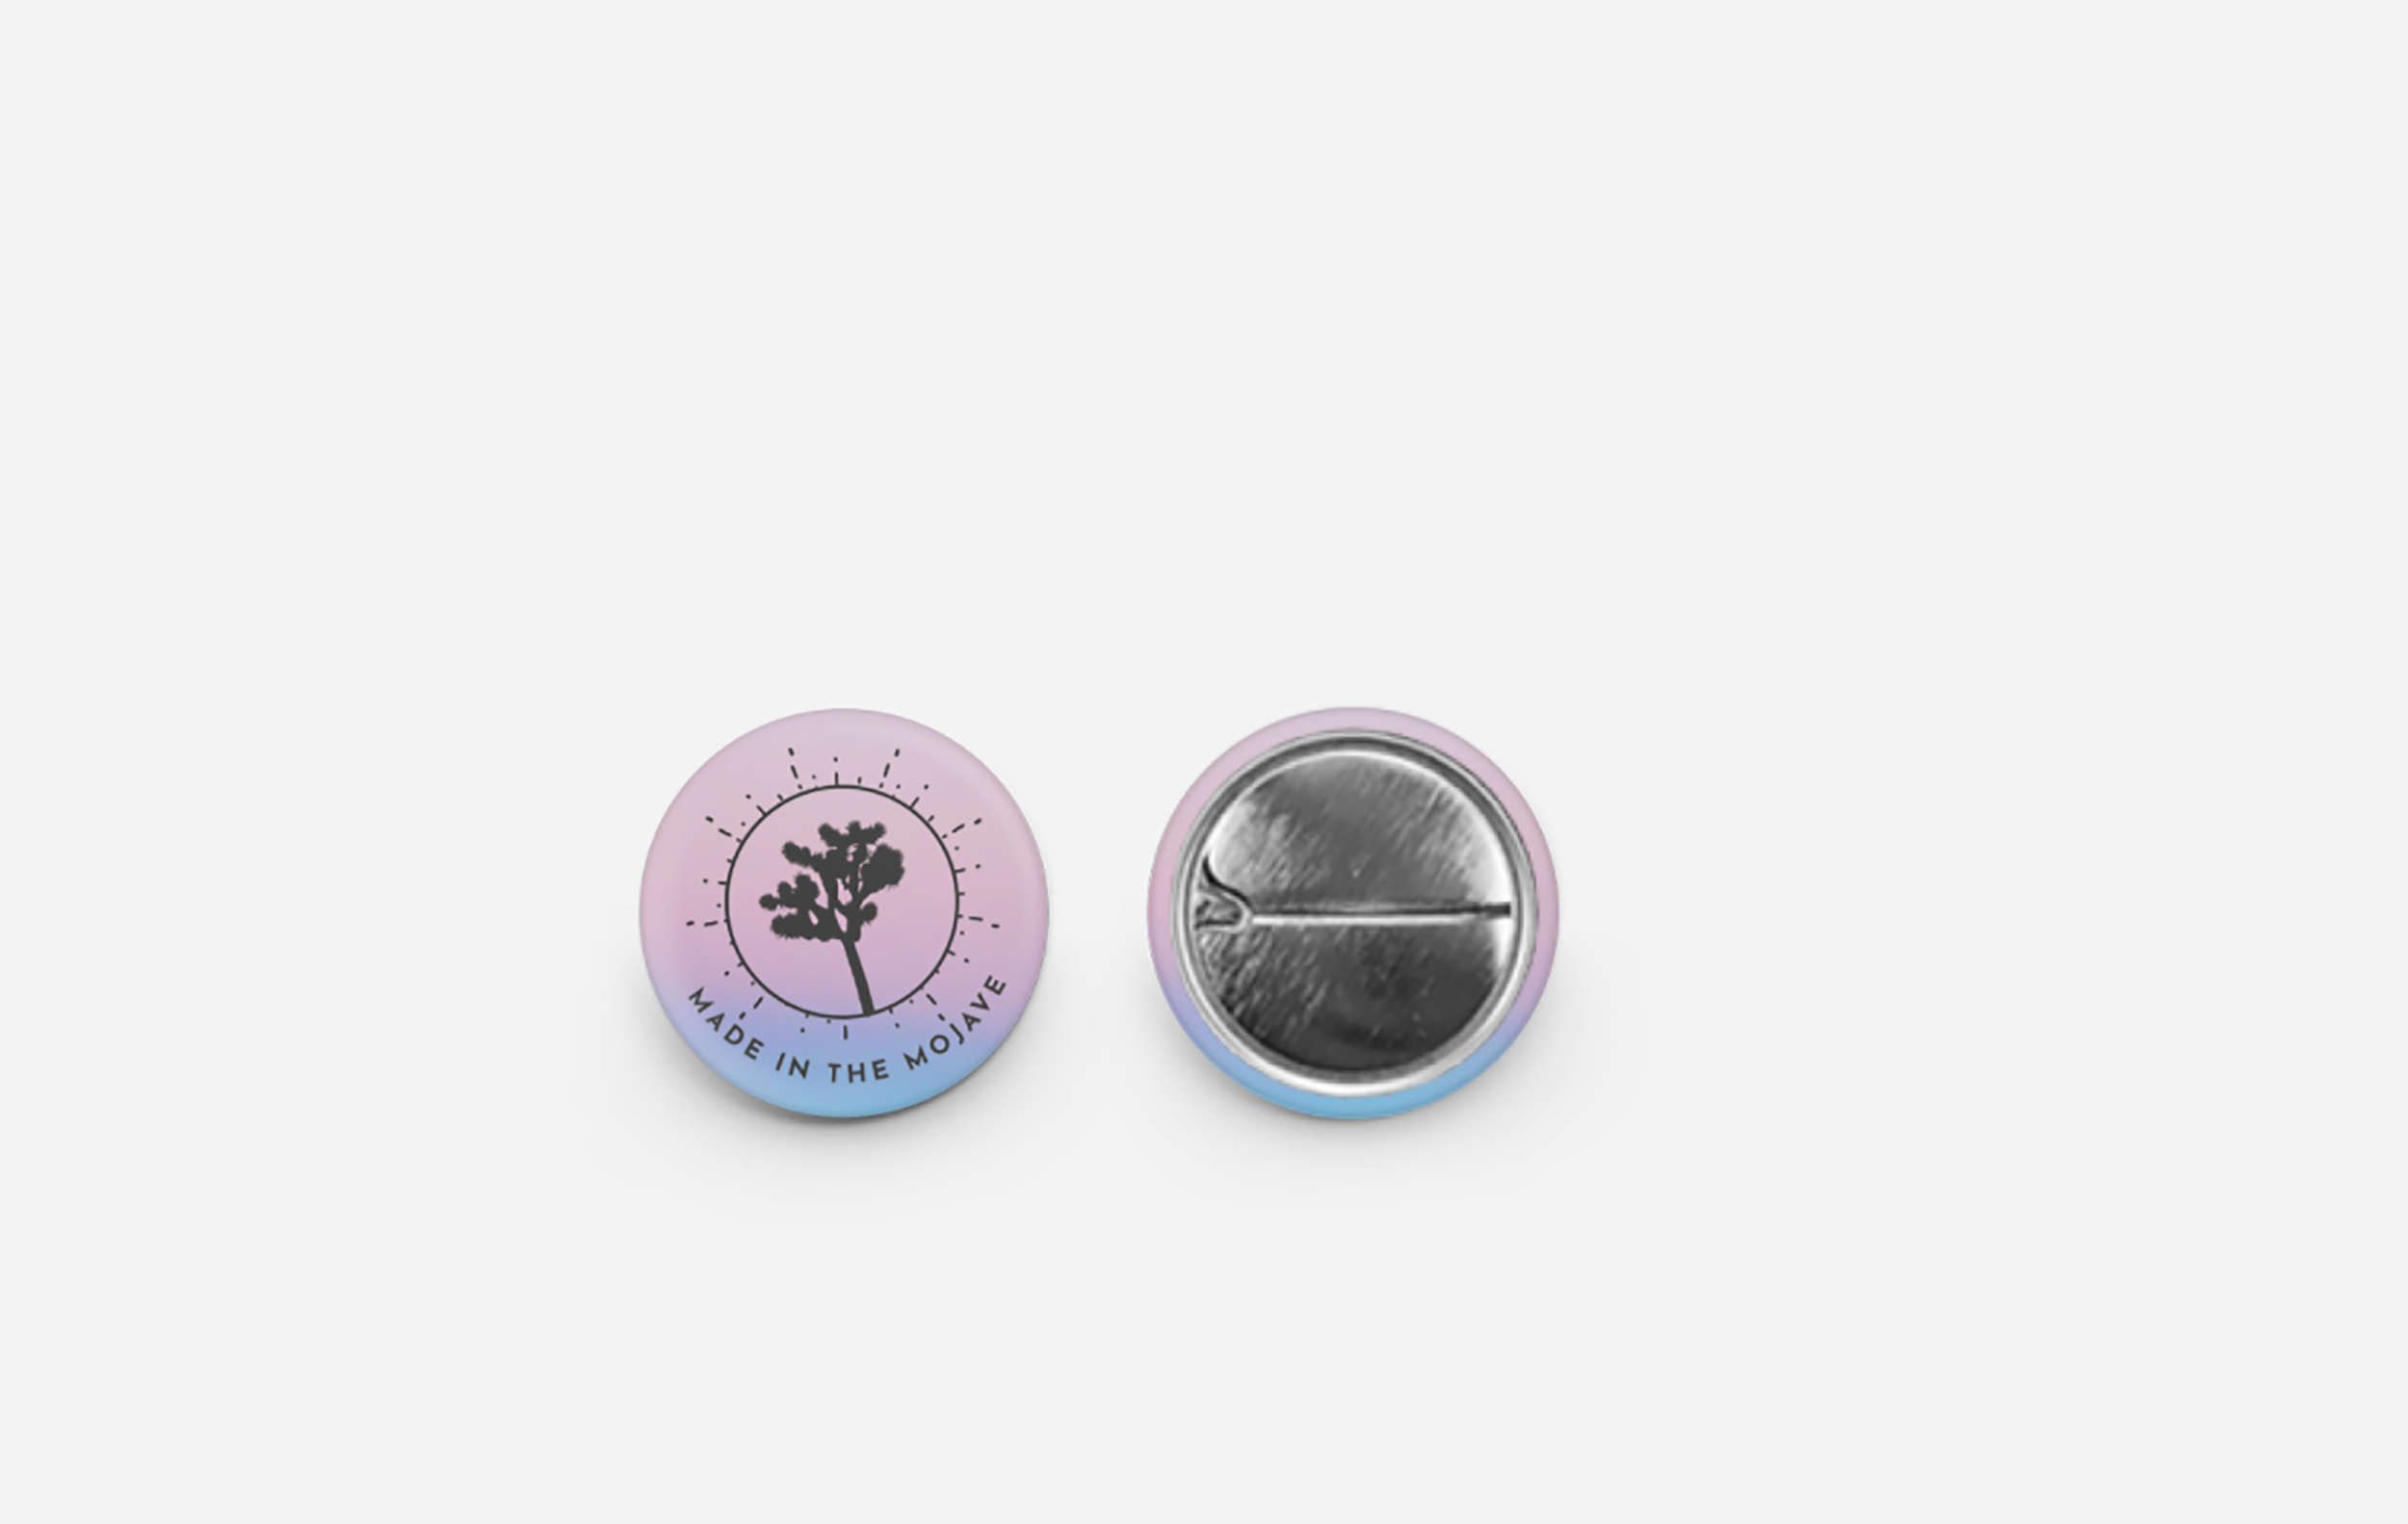 Made in the Mojave 1" Desert Sky Pins/Buttons